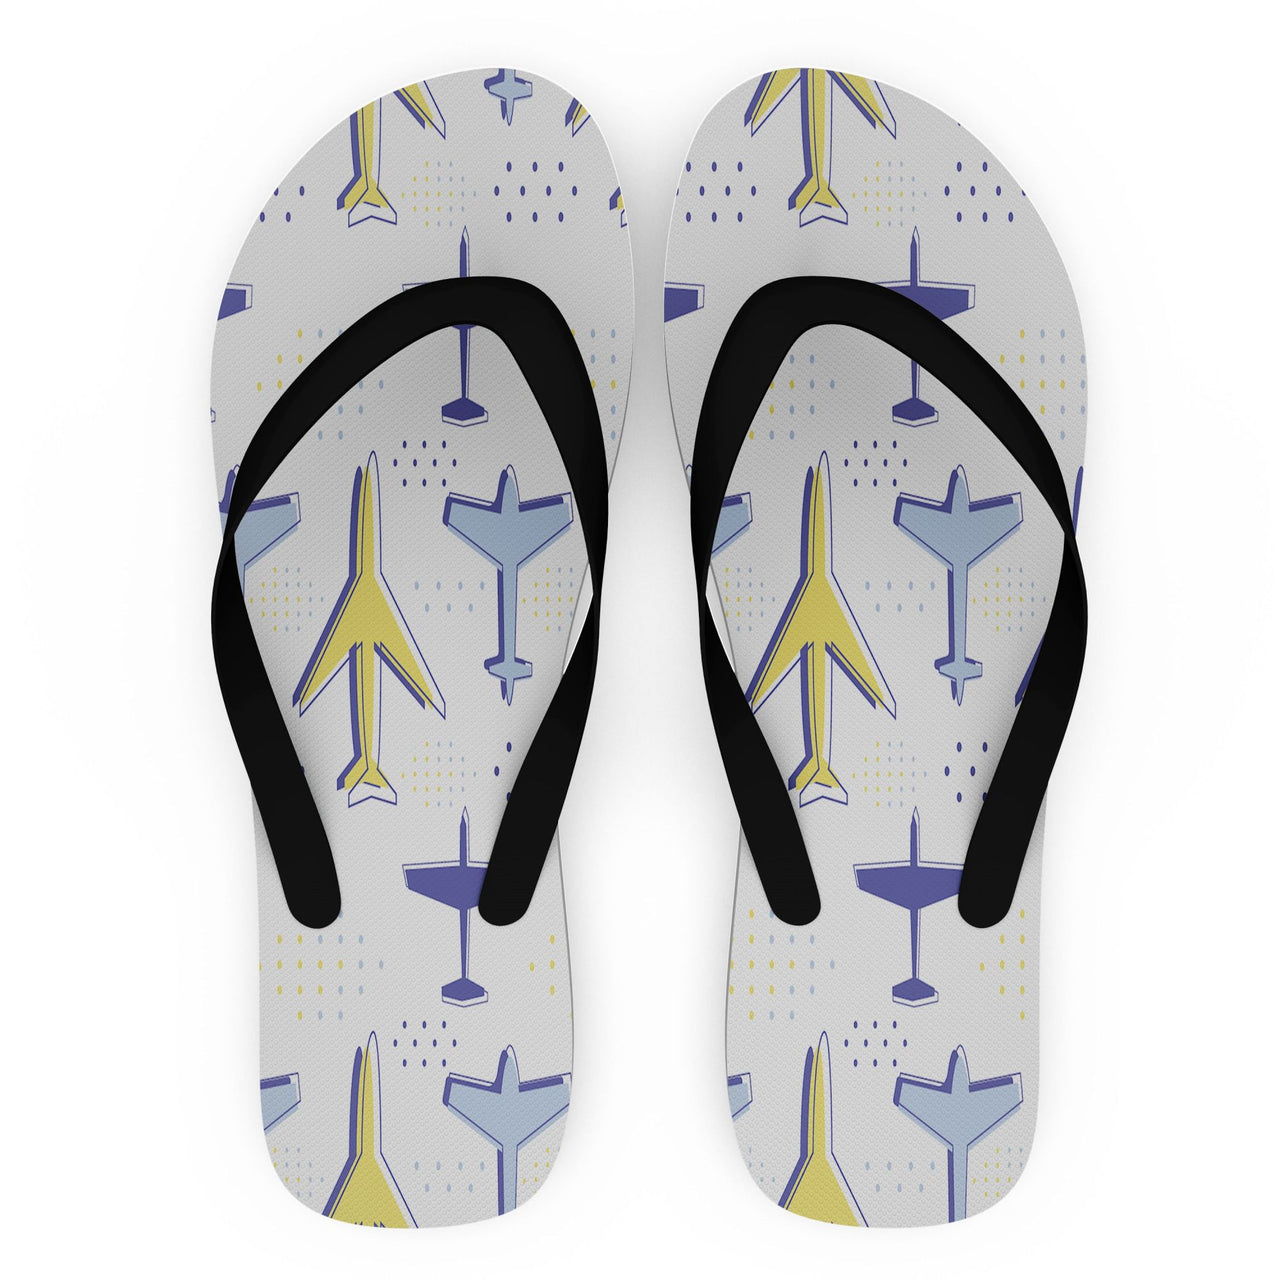 Very Colourful Airplanes Designed Slippers (Flip Flops)